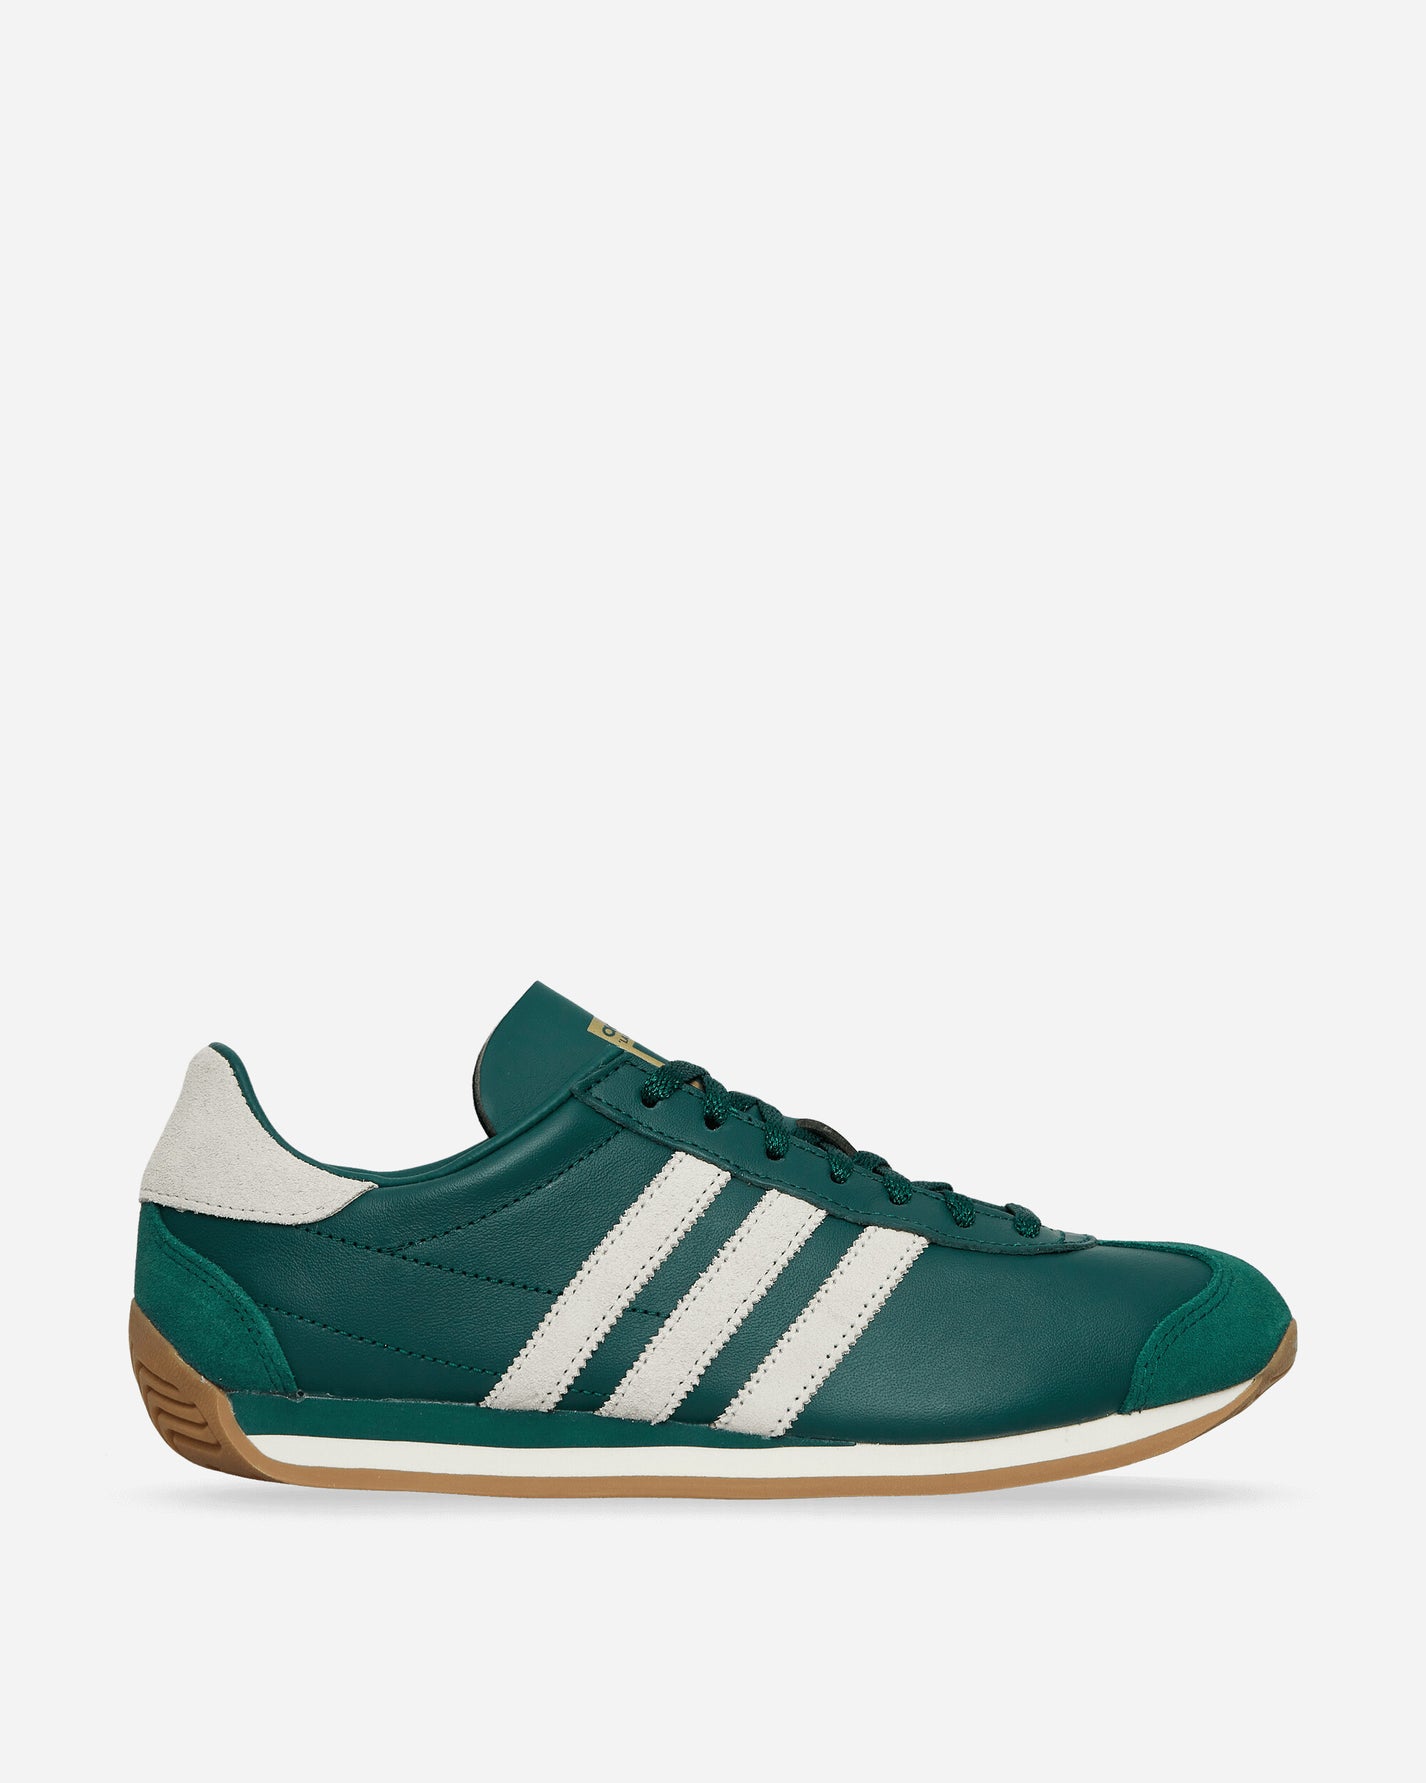 adidas Country Og Collegiate Green/White Sneakers Low IH7514